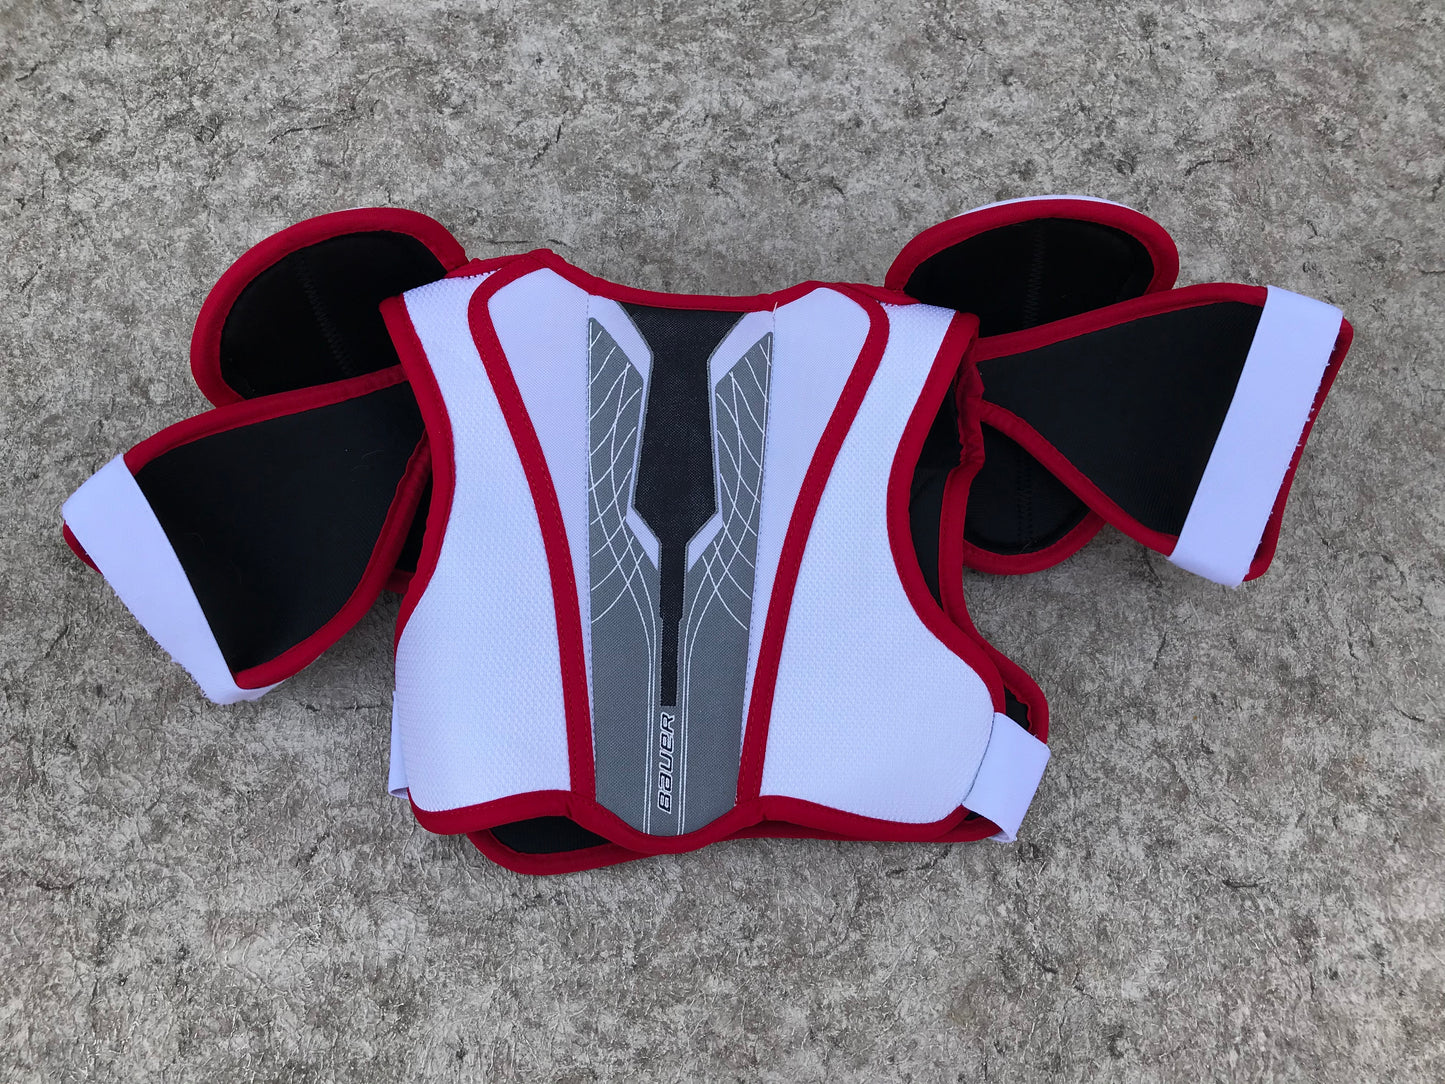 Hockey Shoulder Chest Pad Child Size Junior Small Bauer Canada White Red